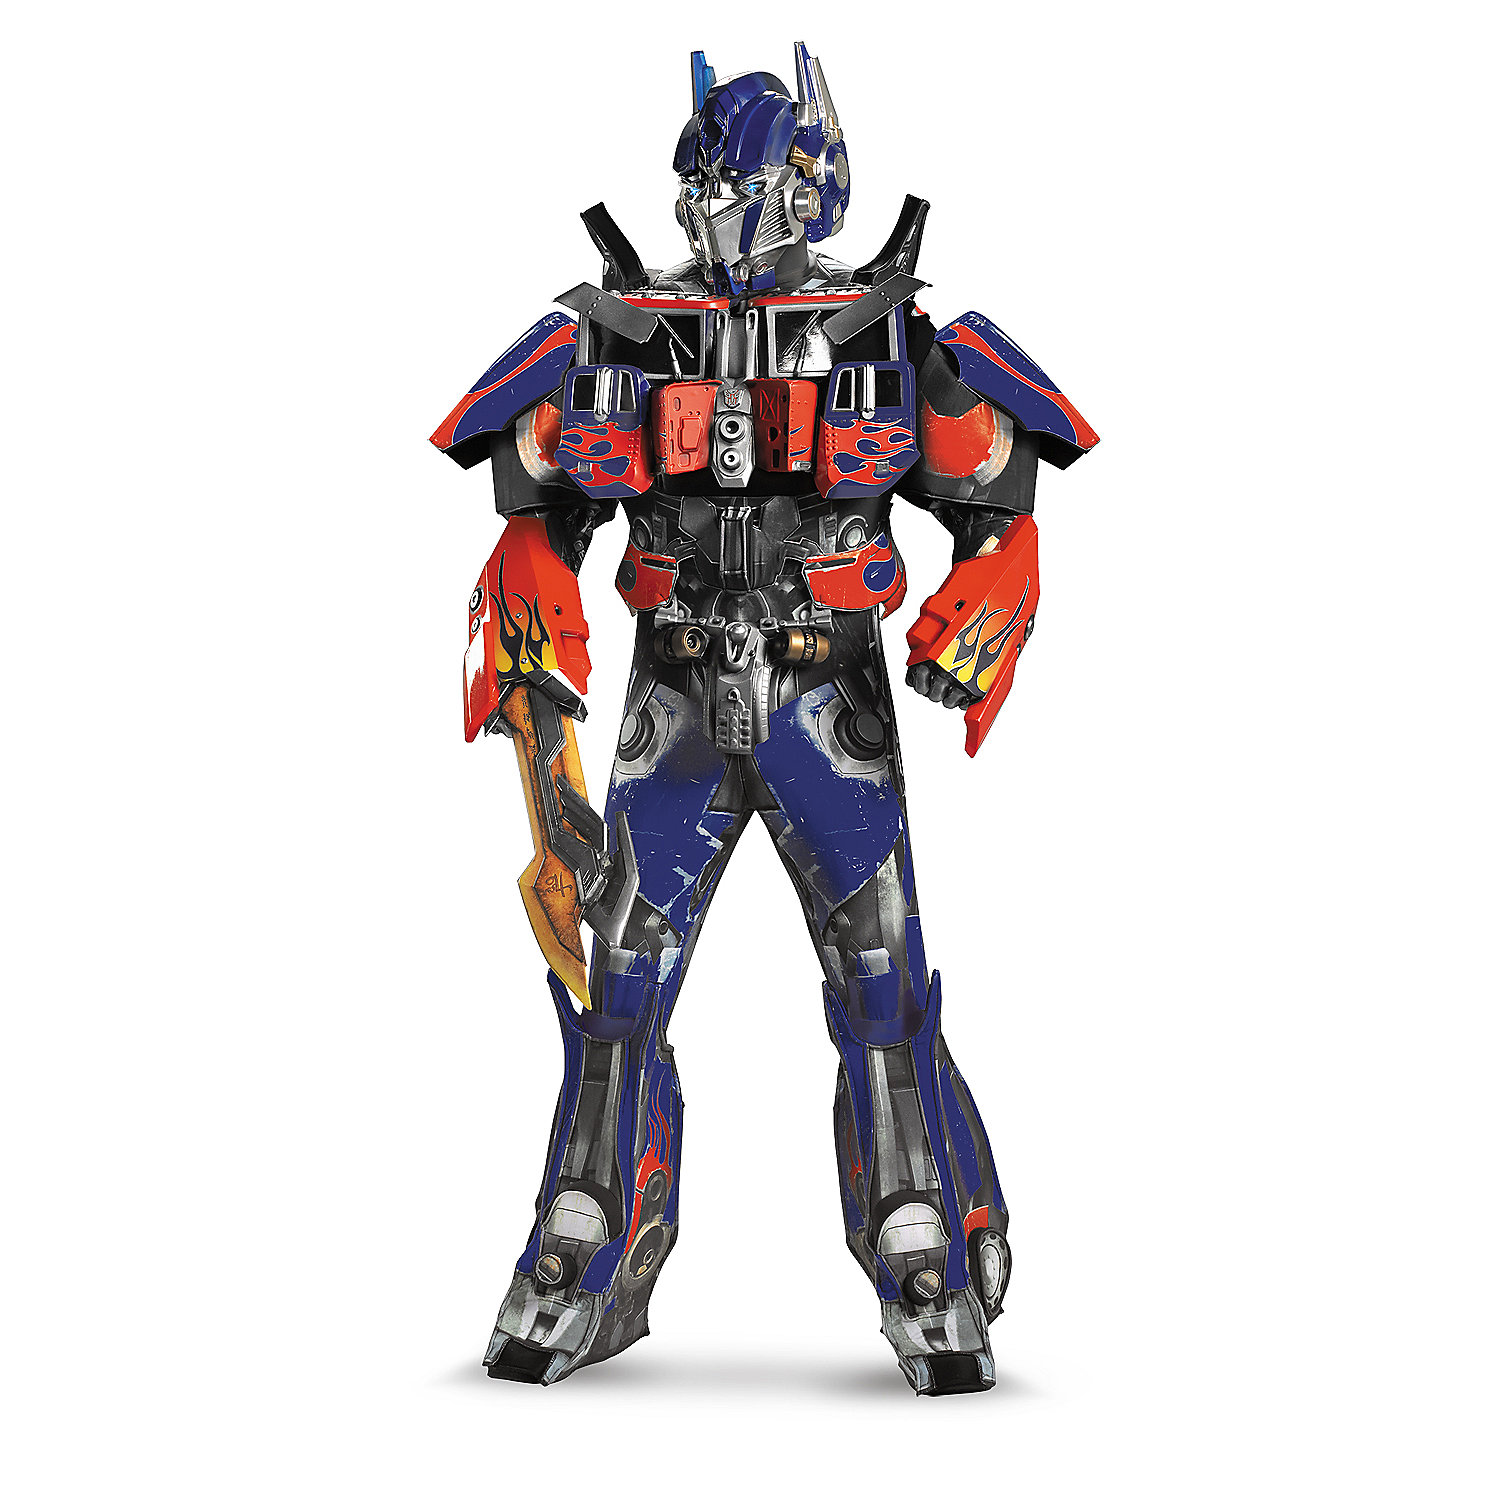 Disguise Mens Transformers Optimus Prime Rental Quality Costume - Size Large/X Large - image 1 of 2